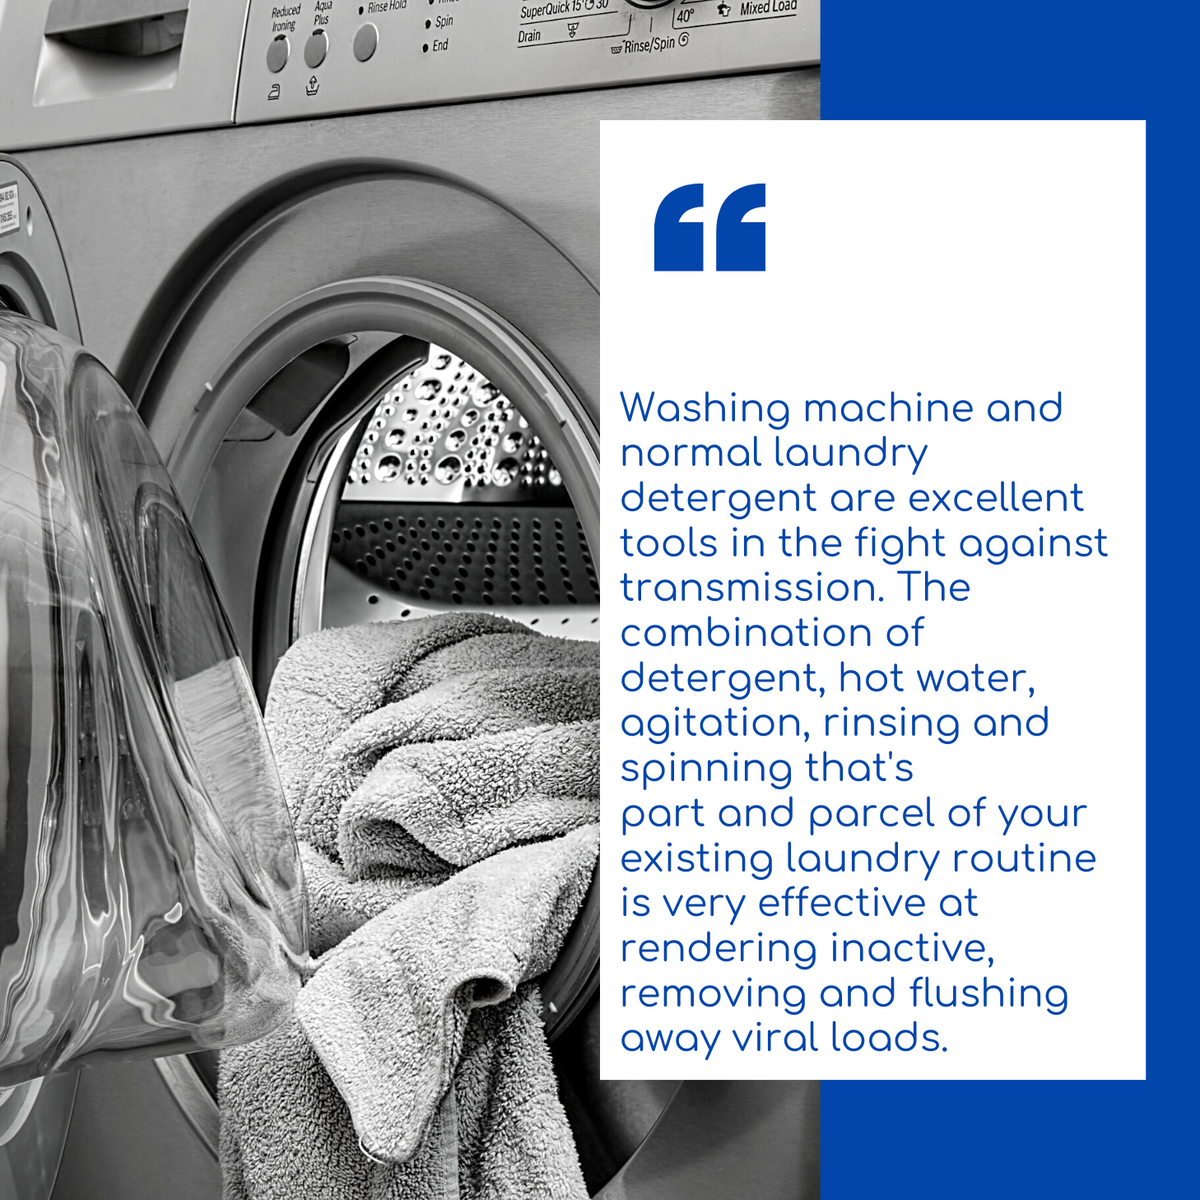 “washing machine and normal laundry detergent are excellent tools in the fight against transmission. The combination of detergent, hot water, agitation, rinsing and spinning that's part and parcel of your existing laundry routine is very effective.